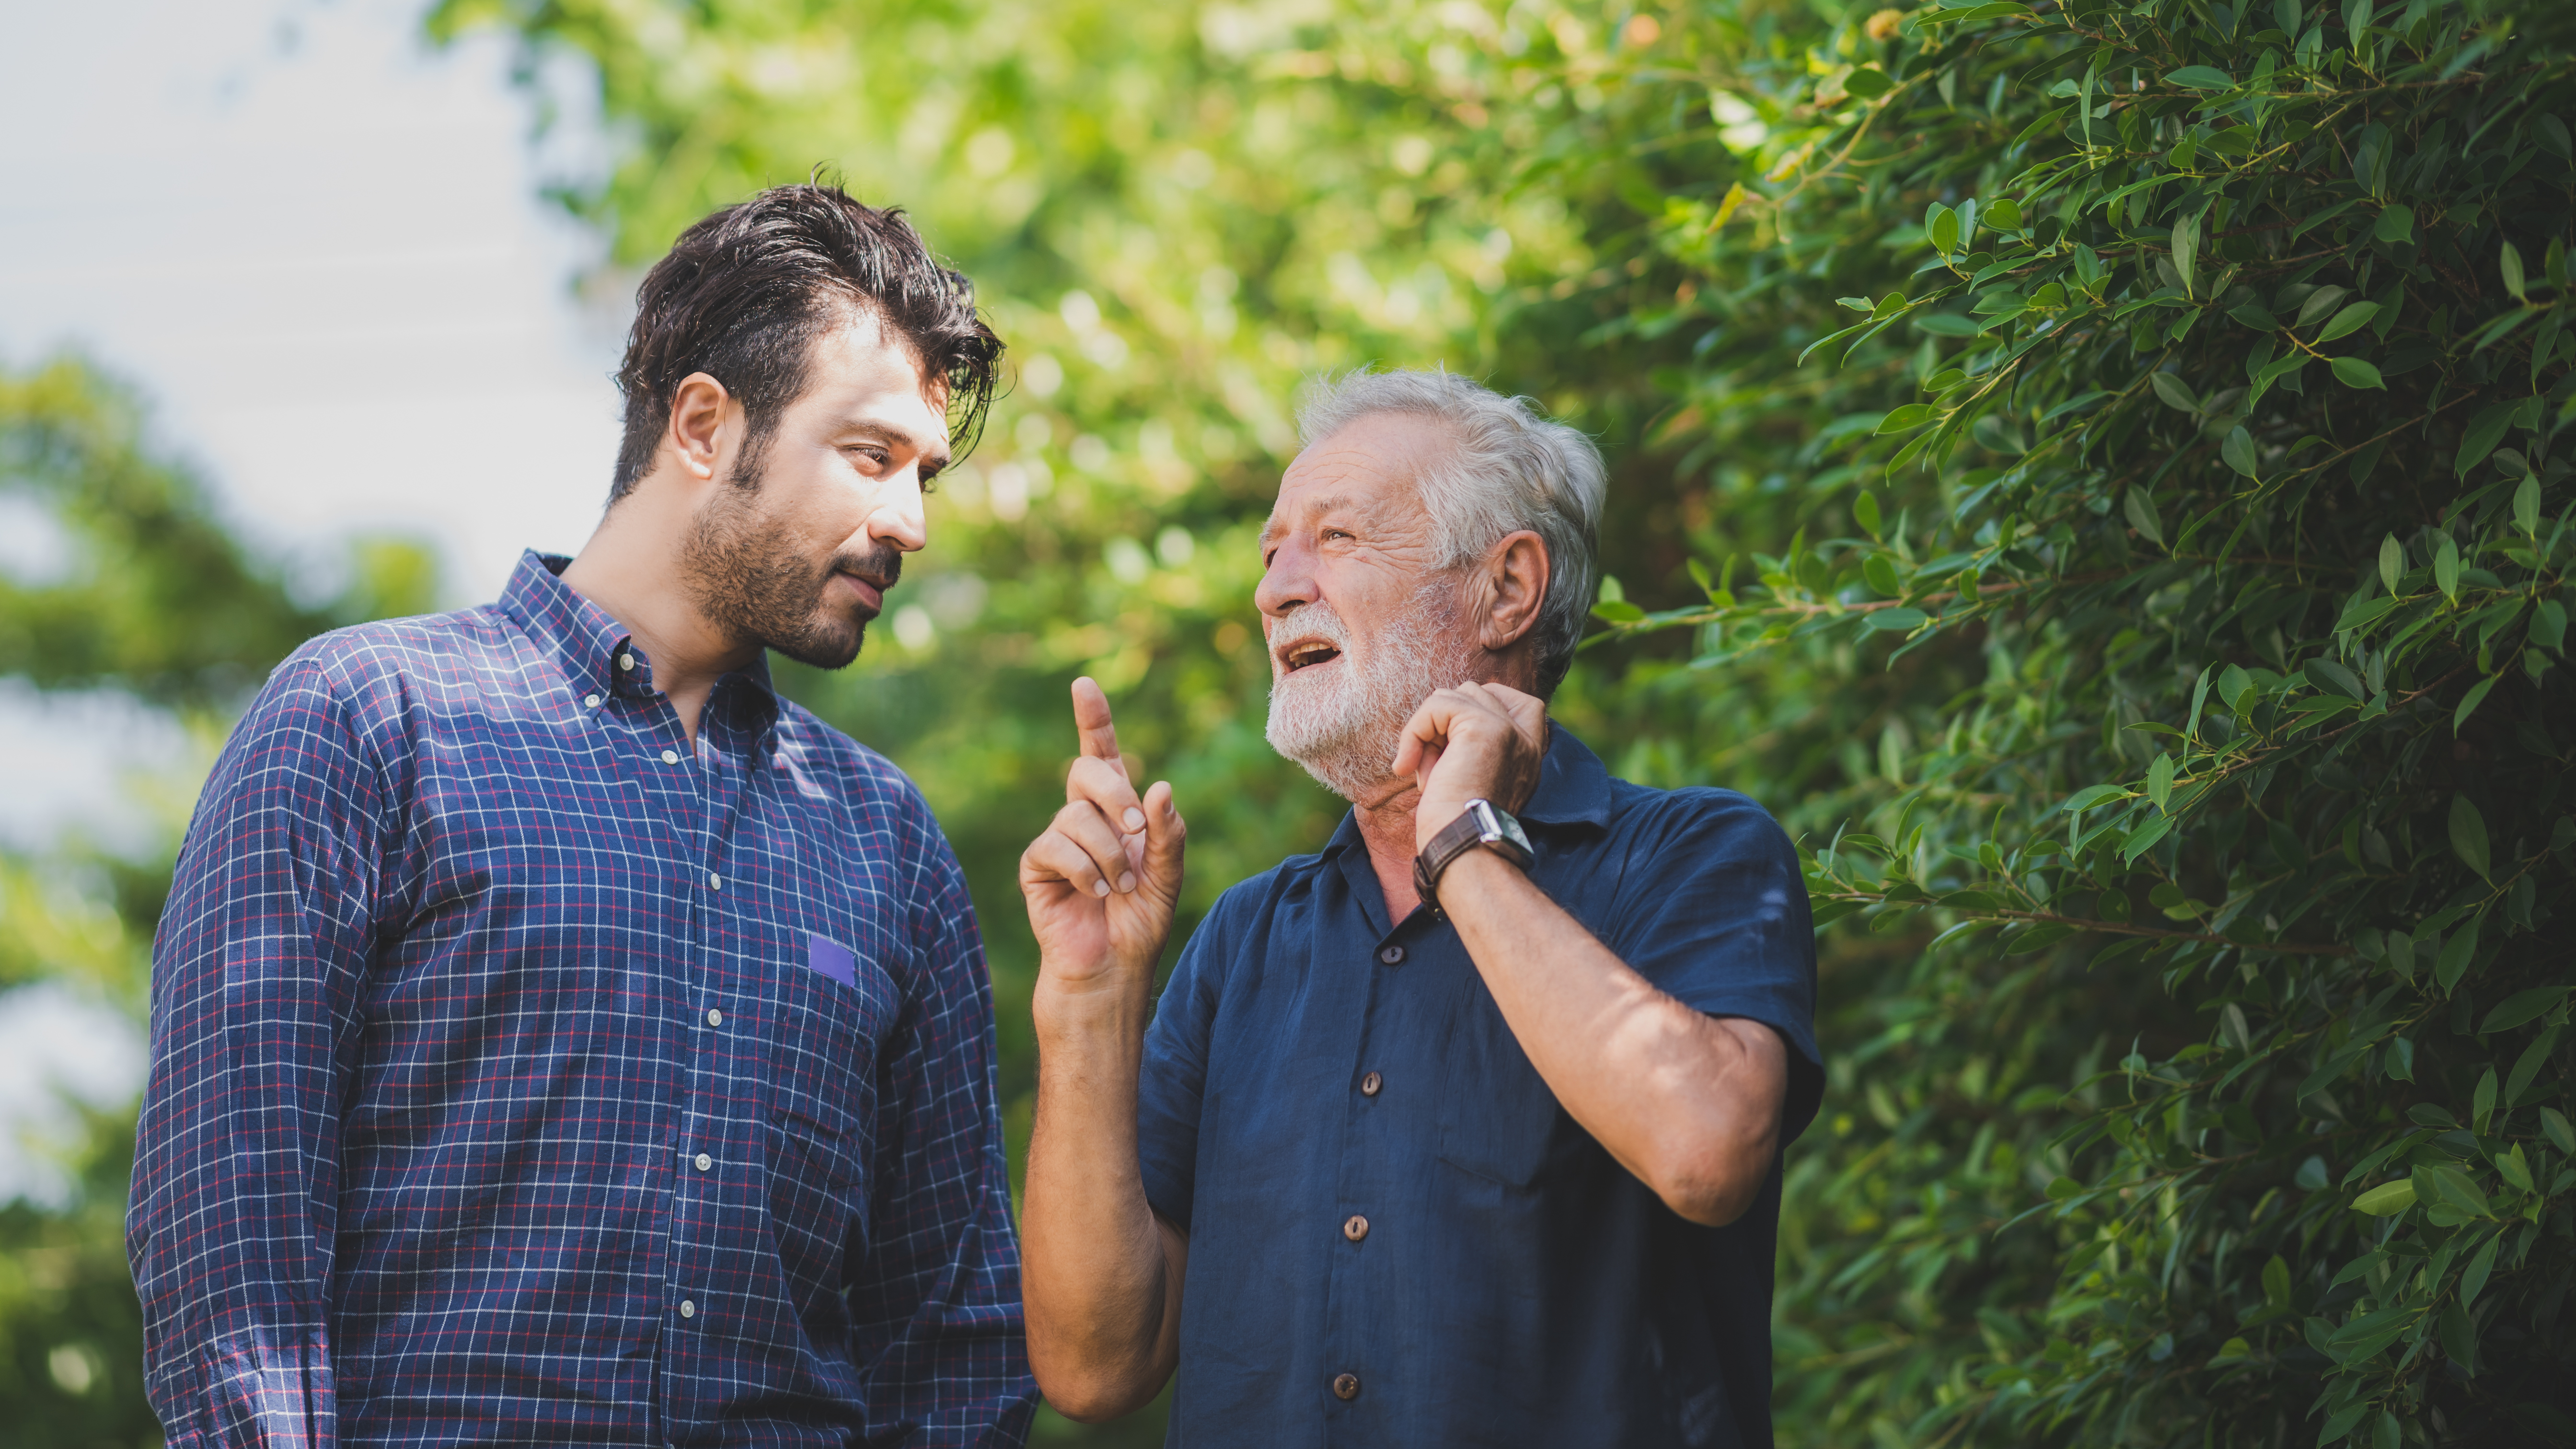 An older man bonding with a younger one outside | Source: Shutterstock